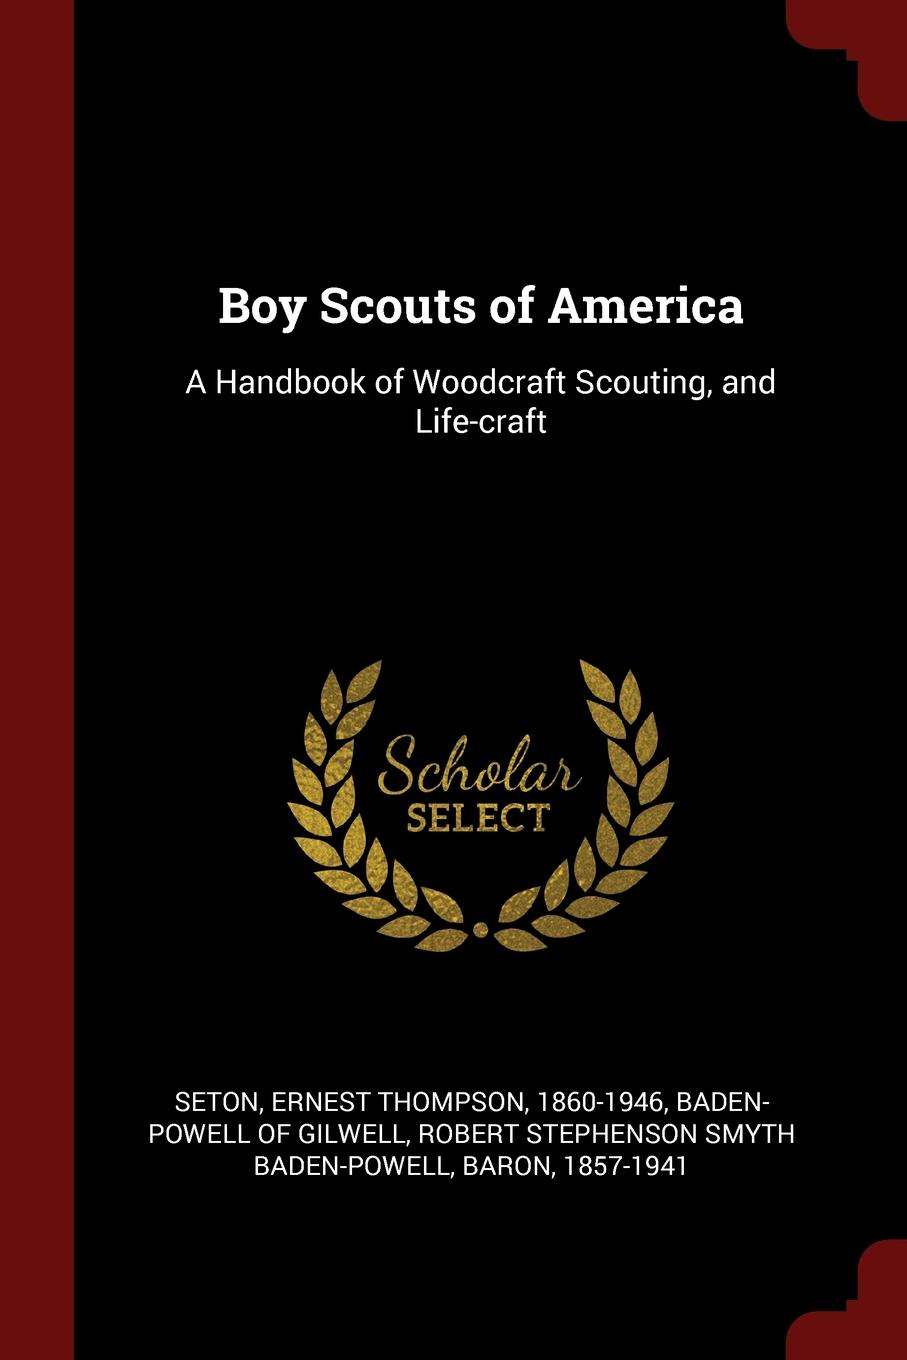 Boy Scouts of America. A Handbook of Woodcraft Scouting, and Life-craft